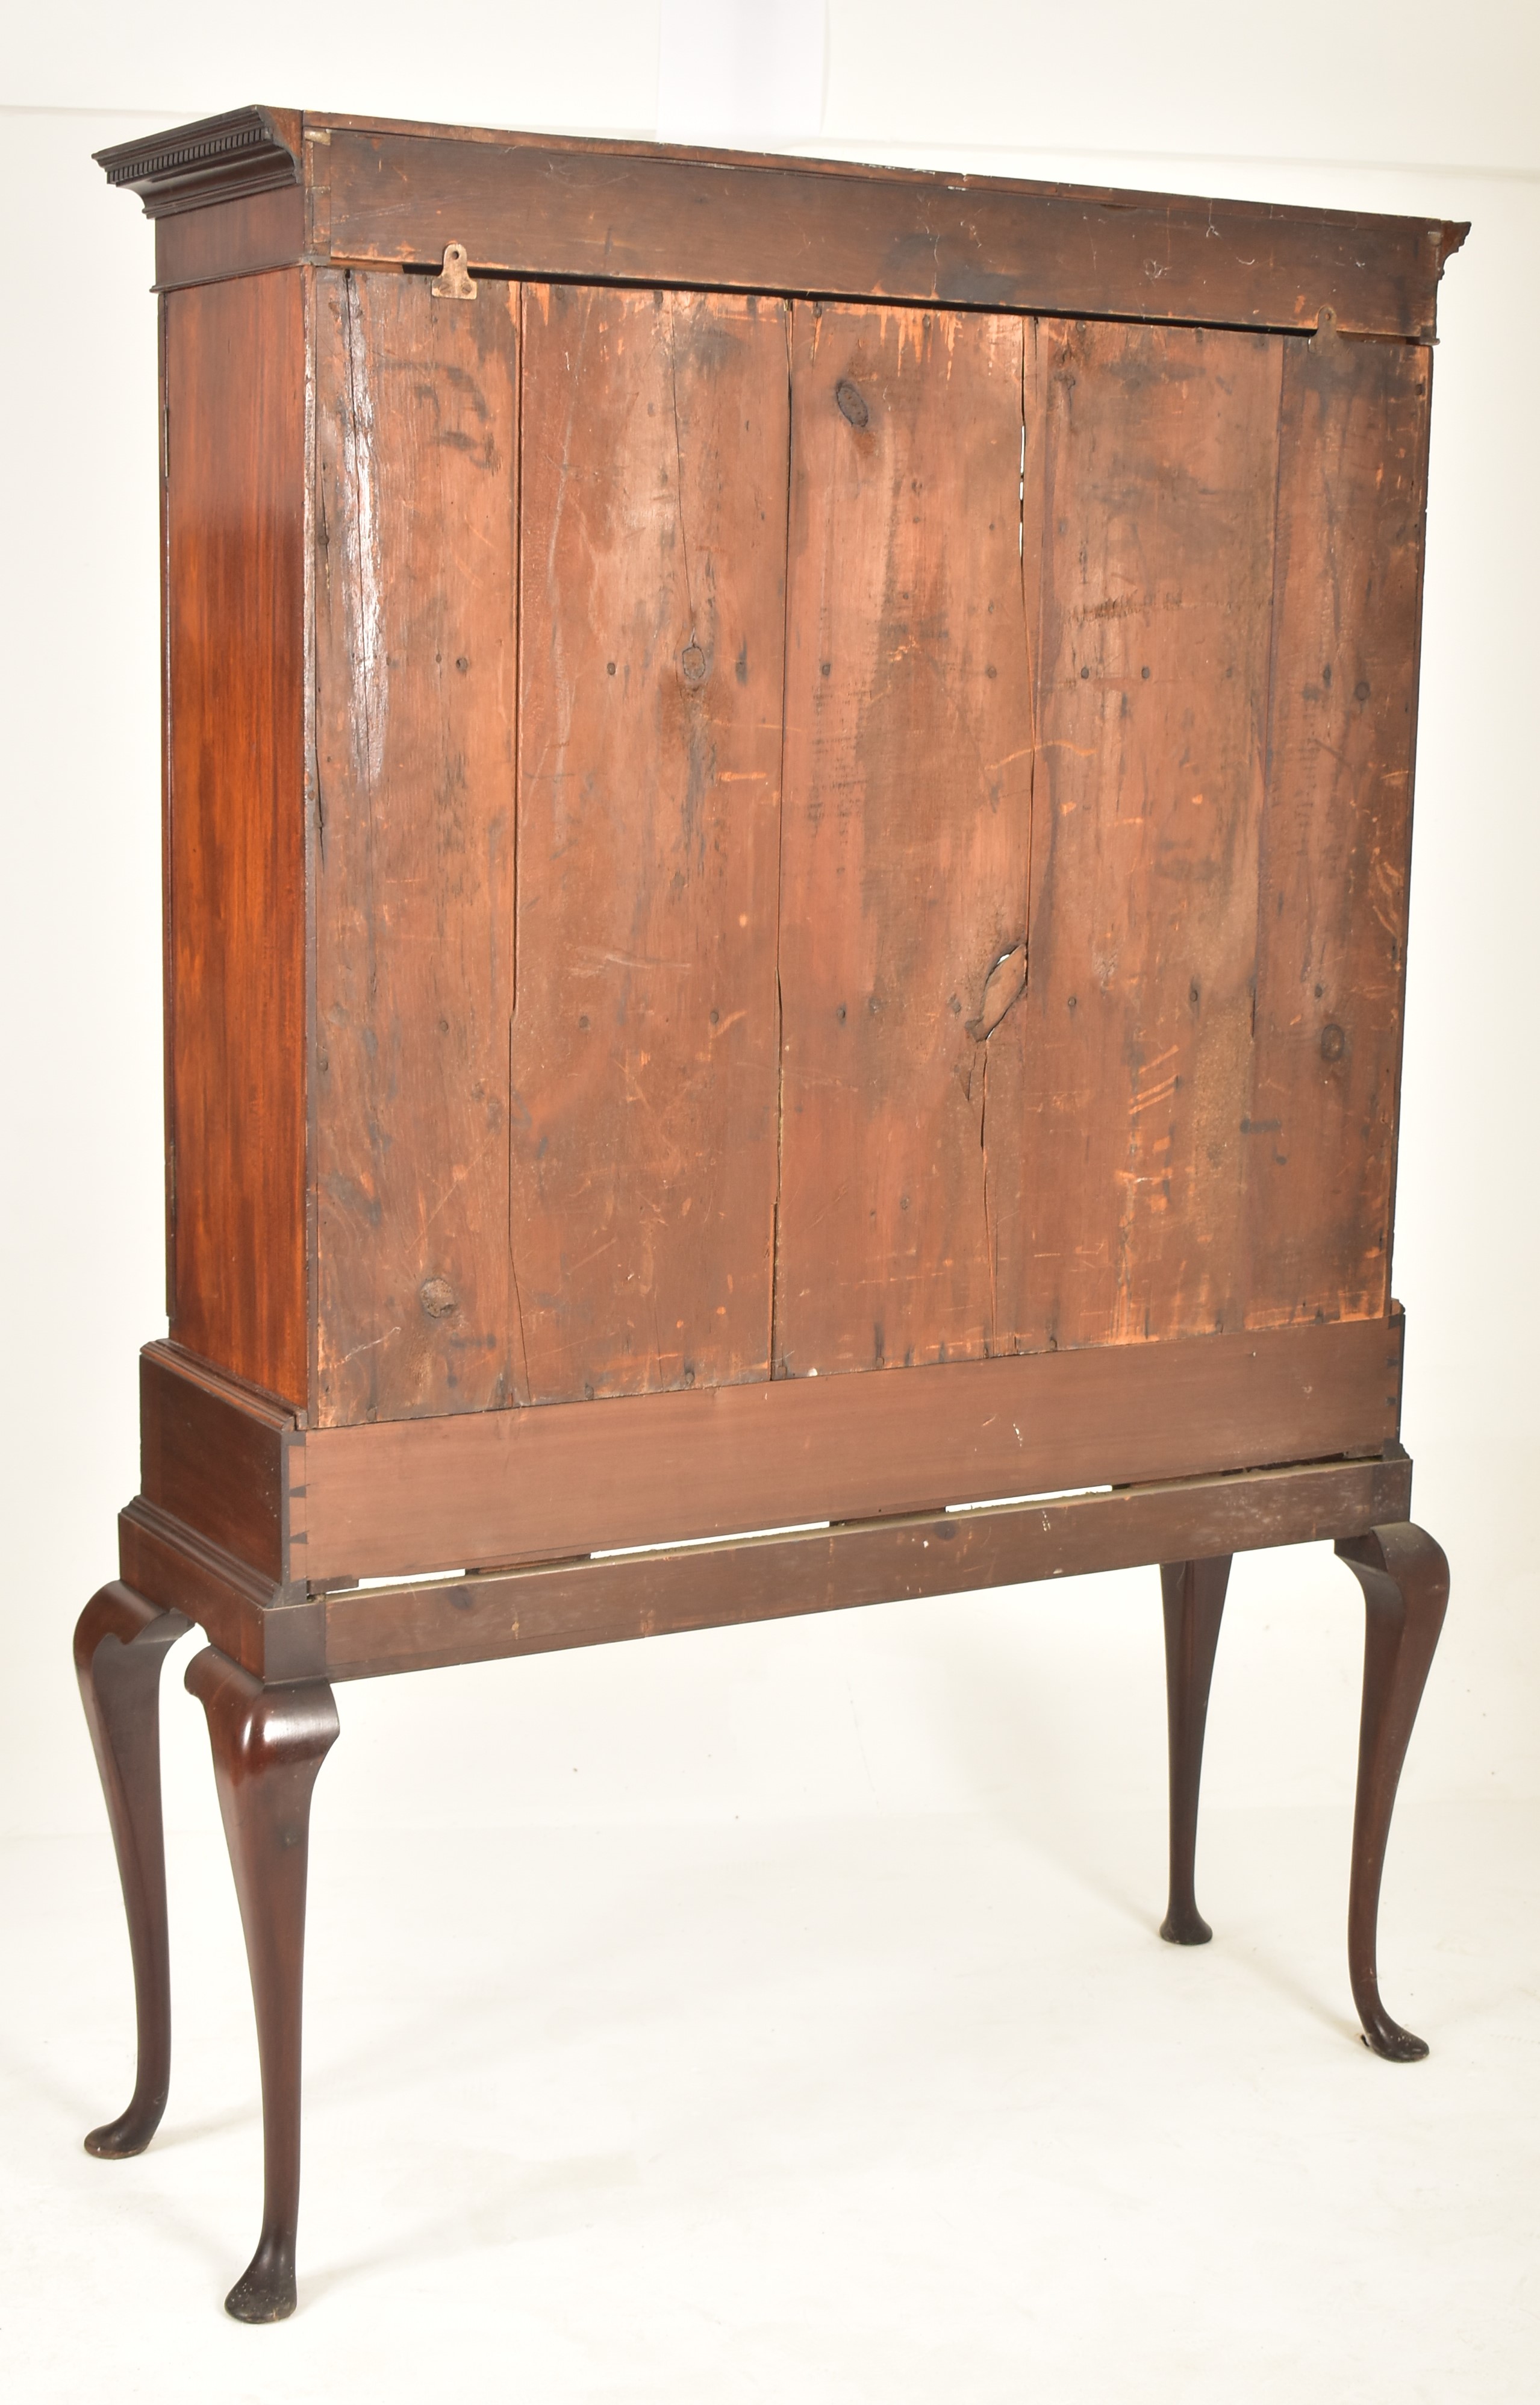 VICTORIAN 19TH CENTURY MAHOGANY CABINET ON STAND - Image 6 of 6